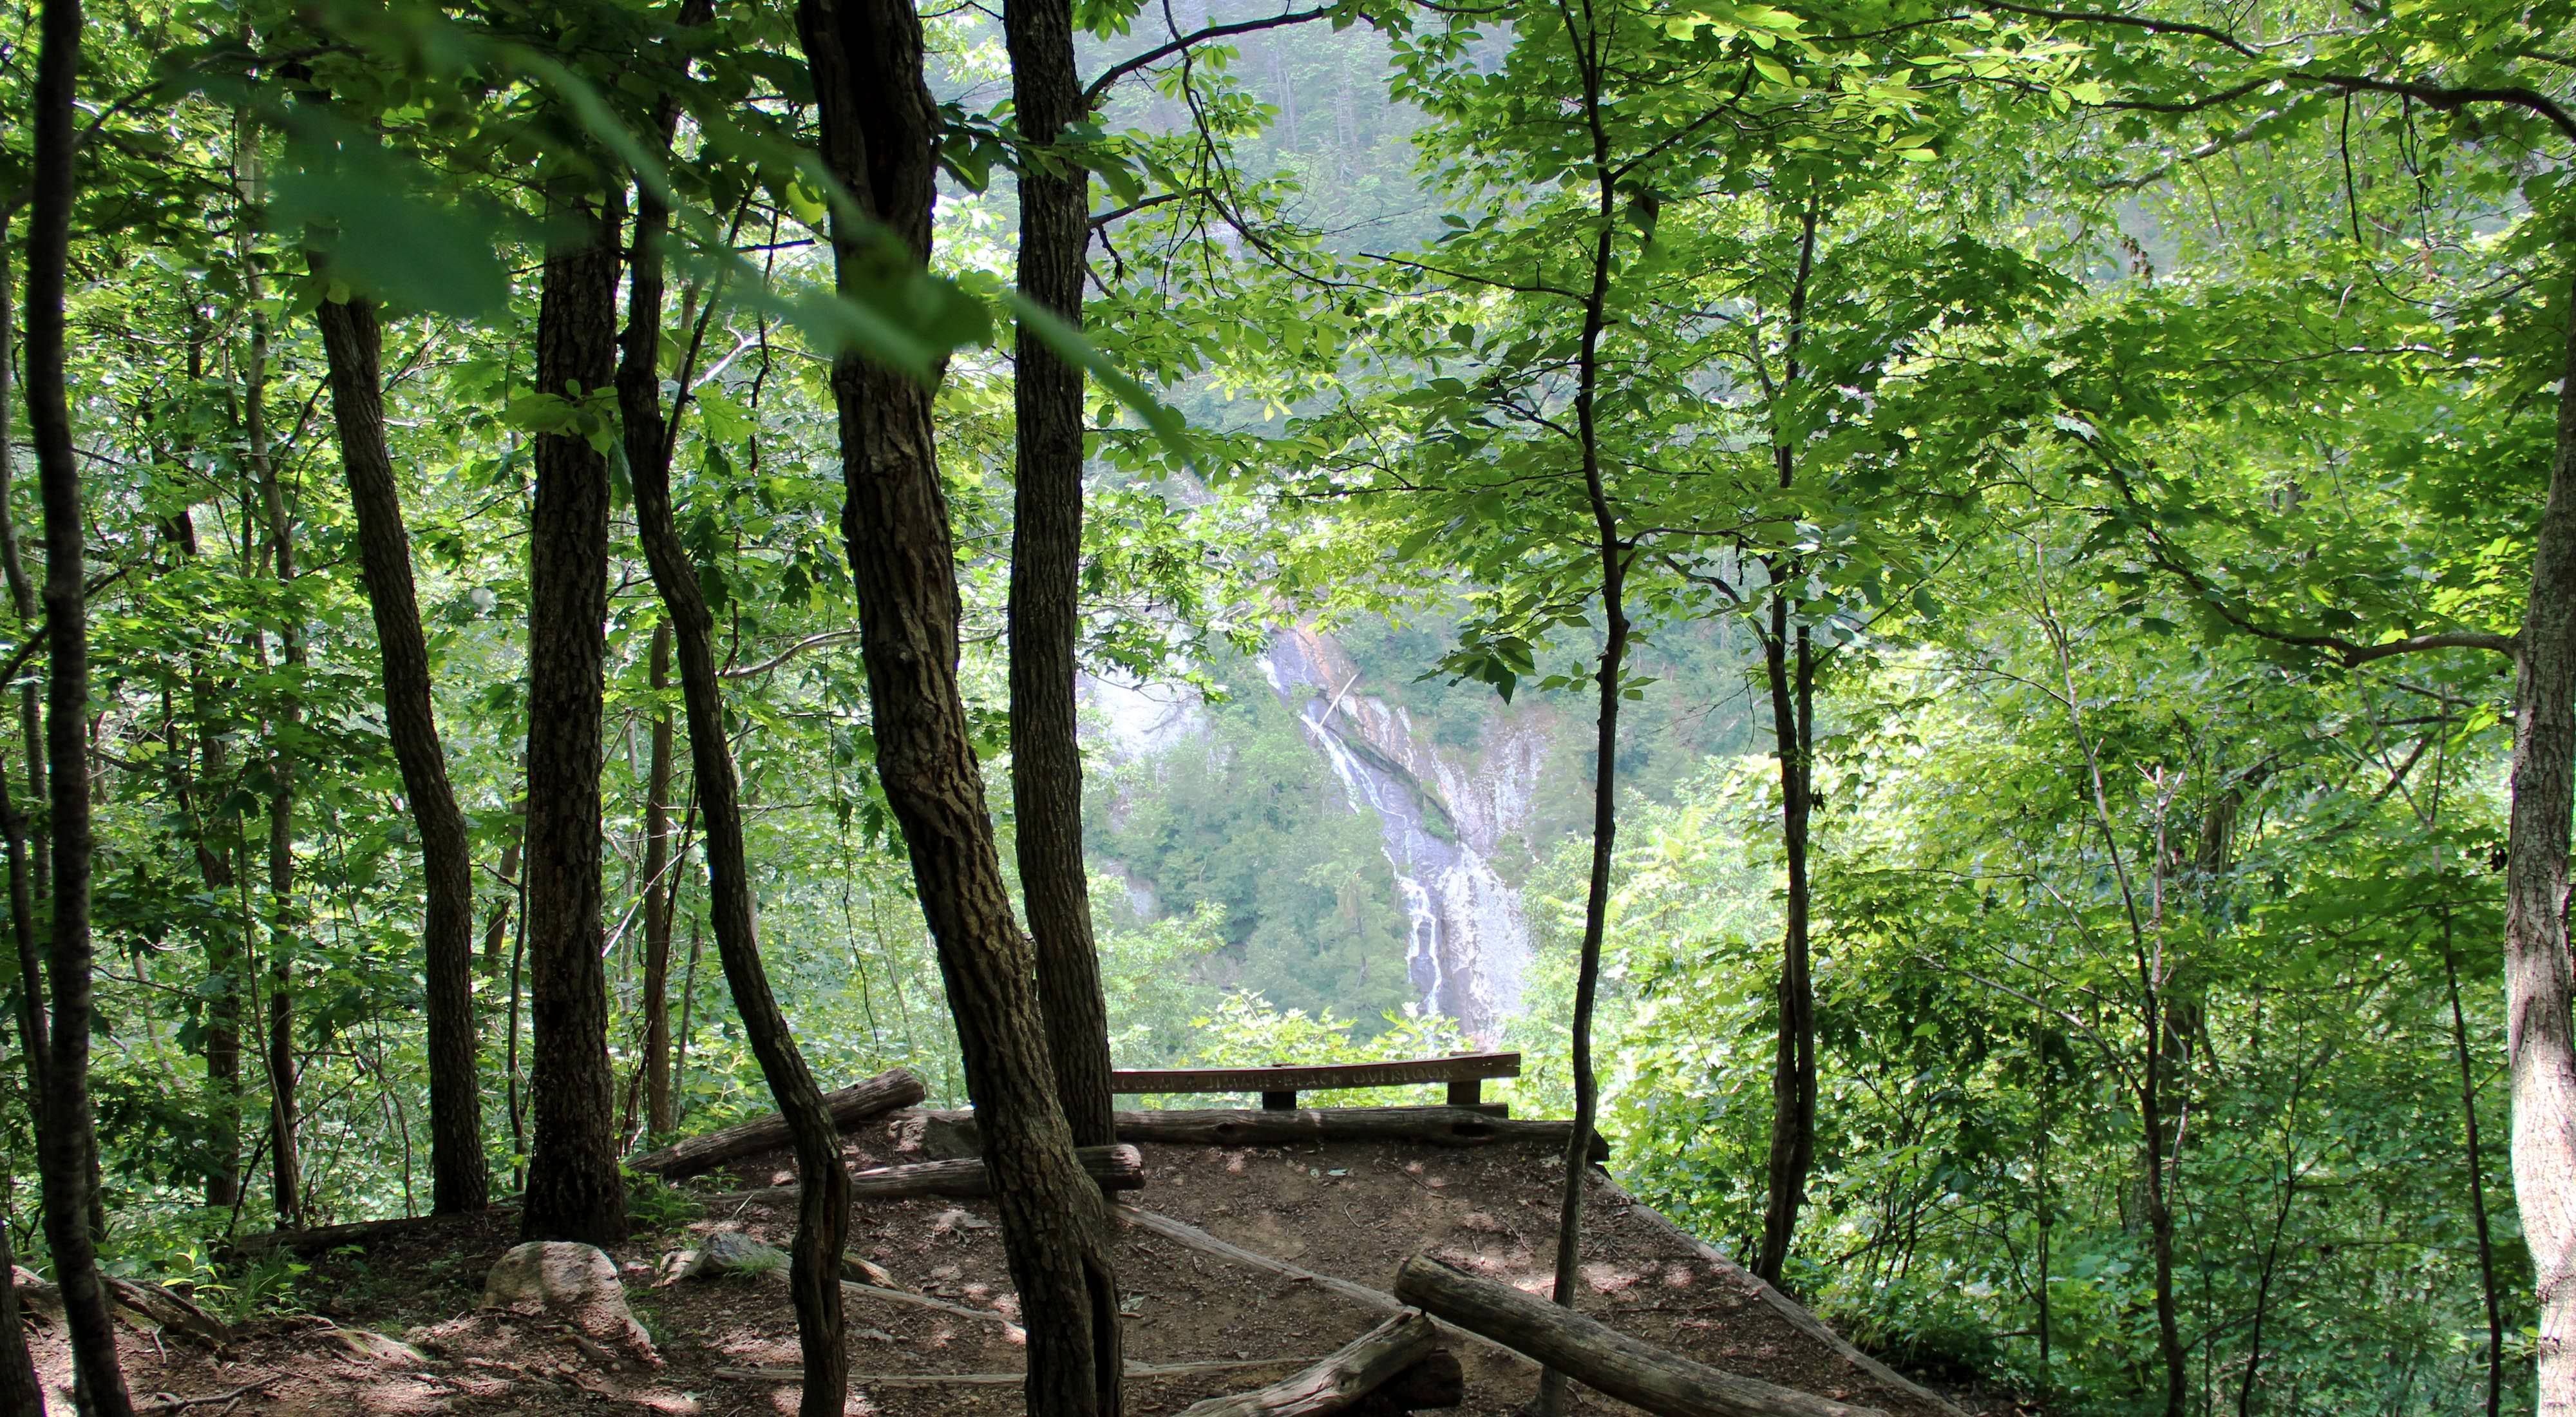 View through the trees of a wooded overlook looking at a narrow waterfall. The water cascades over the bare rock face.